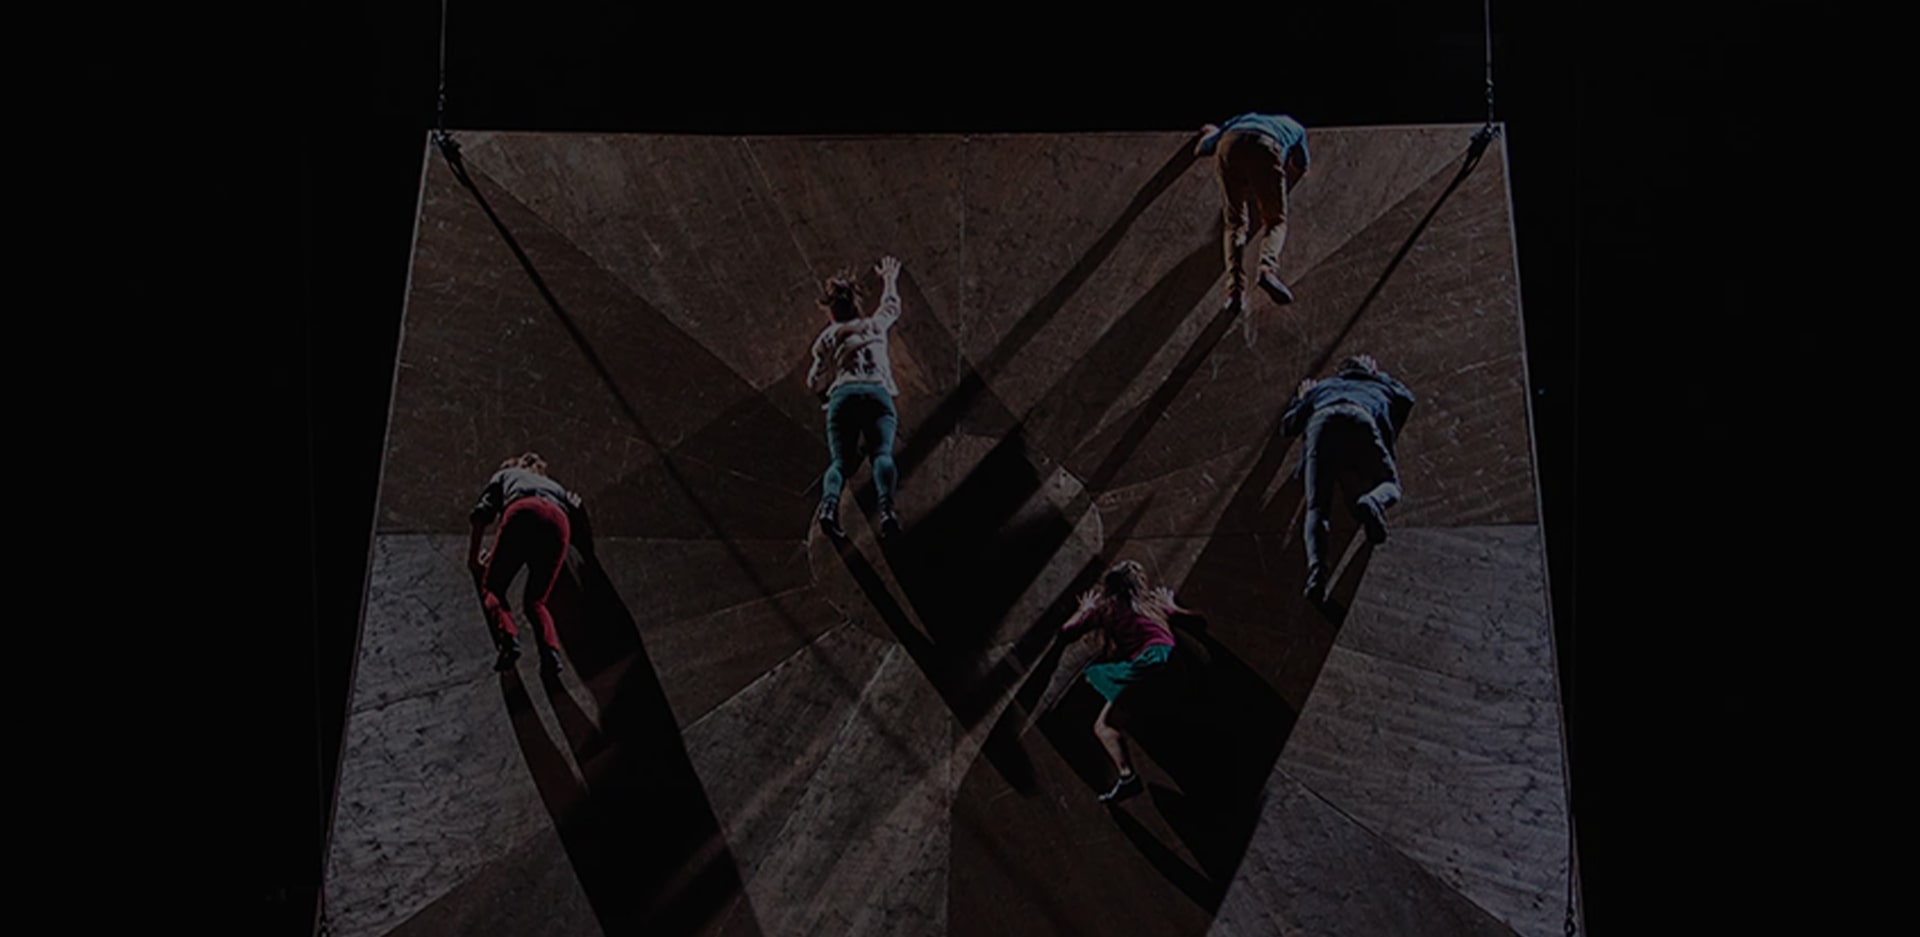 A photo of male and female dancers appearing to fall from an uneven surface.